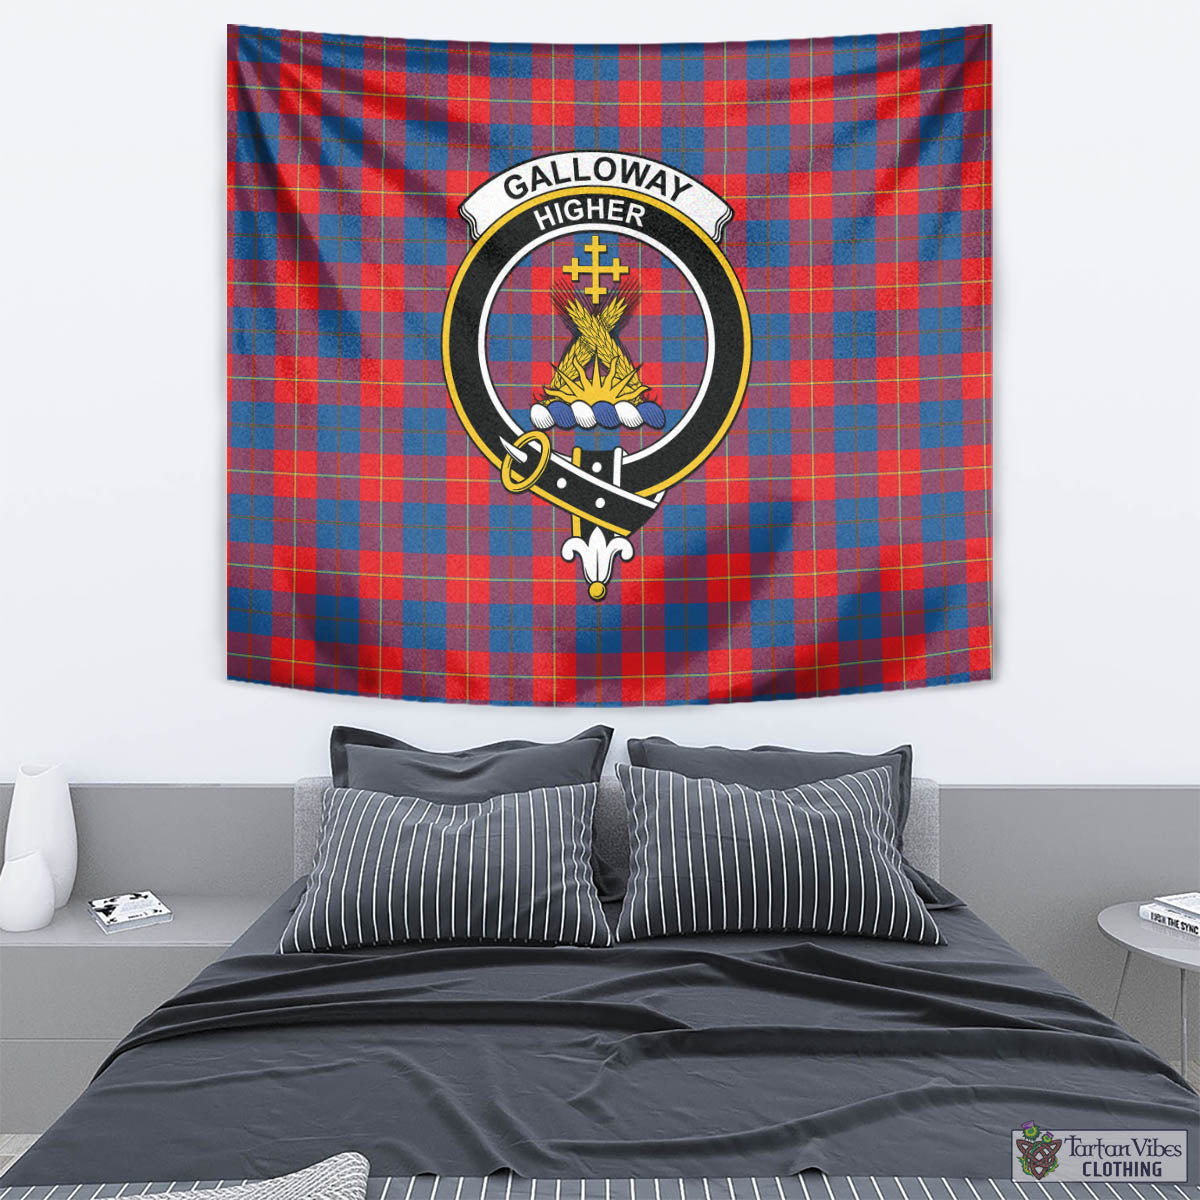 Tartan Vibes Clothing Galloway Red Tartan Tapestry Wall Hanging and Home Decor for Room with Family Crest